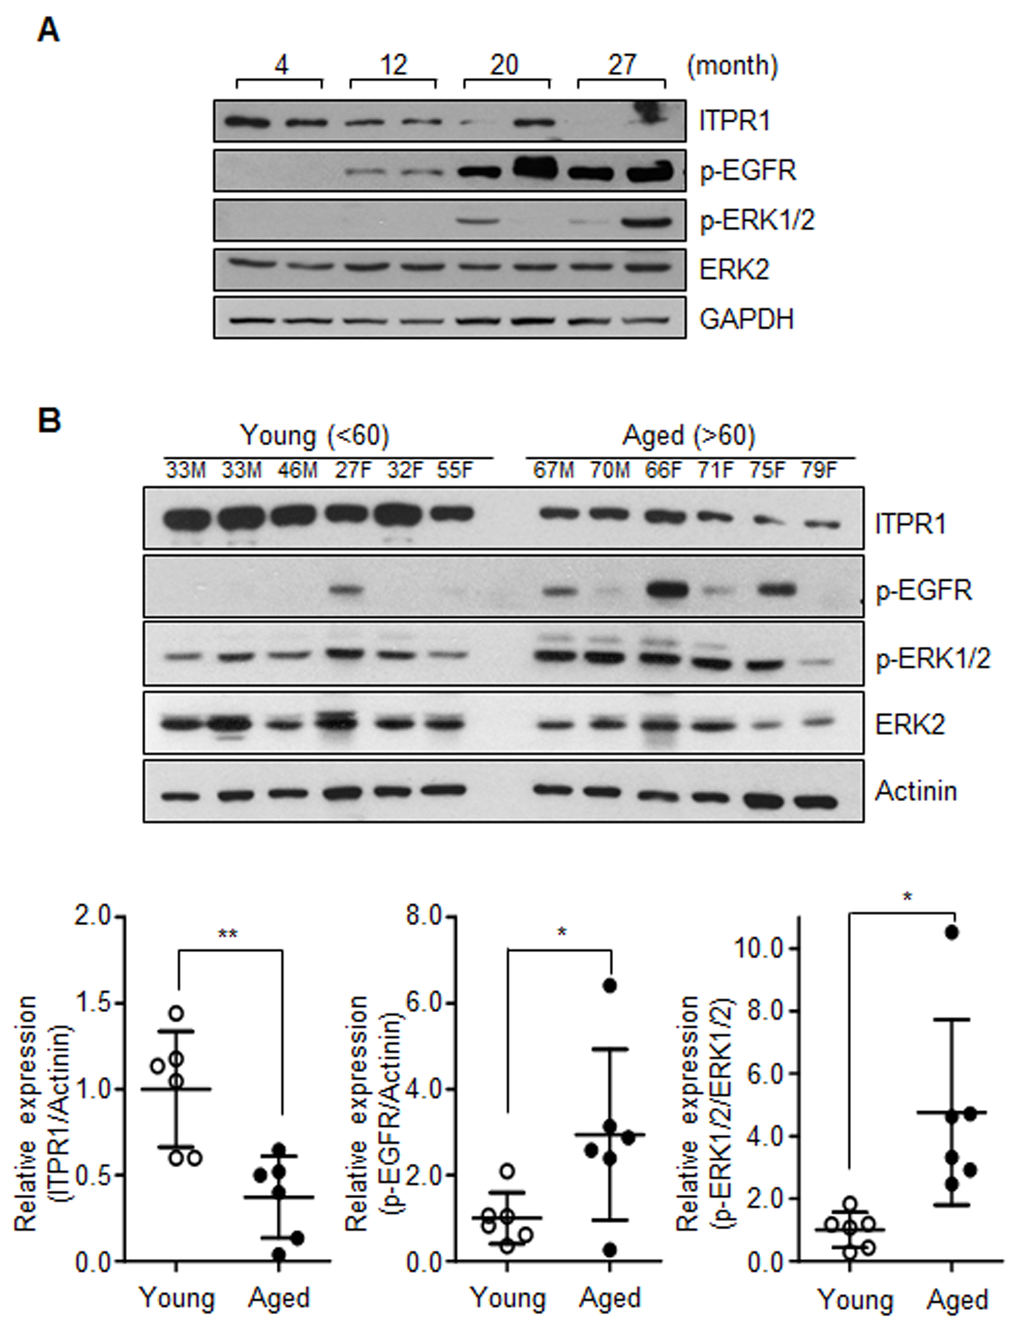 Activation of the EGFR-Ras-ERK pathway in aged muscle. (A) Immunoblot analysis of quadriceps tissue extracts from 4, 12, 20, 27 months mice with anti-ITPR1, anti-phospho EGFR, anti-phospho ERK1/2, and anti-ERK2 antibodies. GAPDH was used as the loading control. n = 2 for each group. (B) Immunoblot analysis of human quadriceps (vastus lateralis) derived from young and aged individuals with anti-ITPR1, anti-phospho EGFR, anti-phospho ERK1/2, and anti-ERK2 antibodies. Actinin was used as the loading control. Young subjects represented individuals less than 60 years of age while aged subjects were greater than 60 years of age. n = 6 for each group.